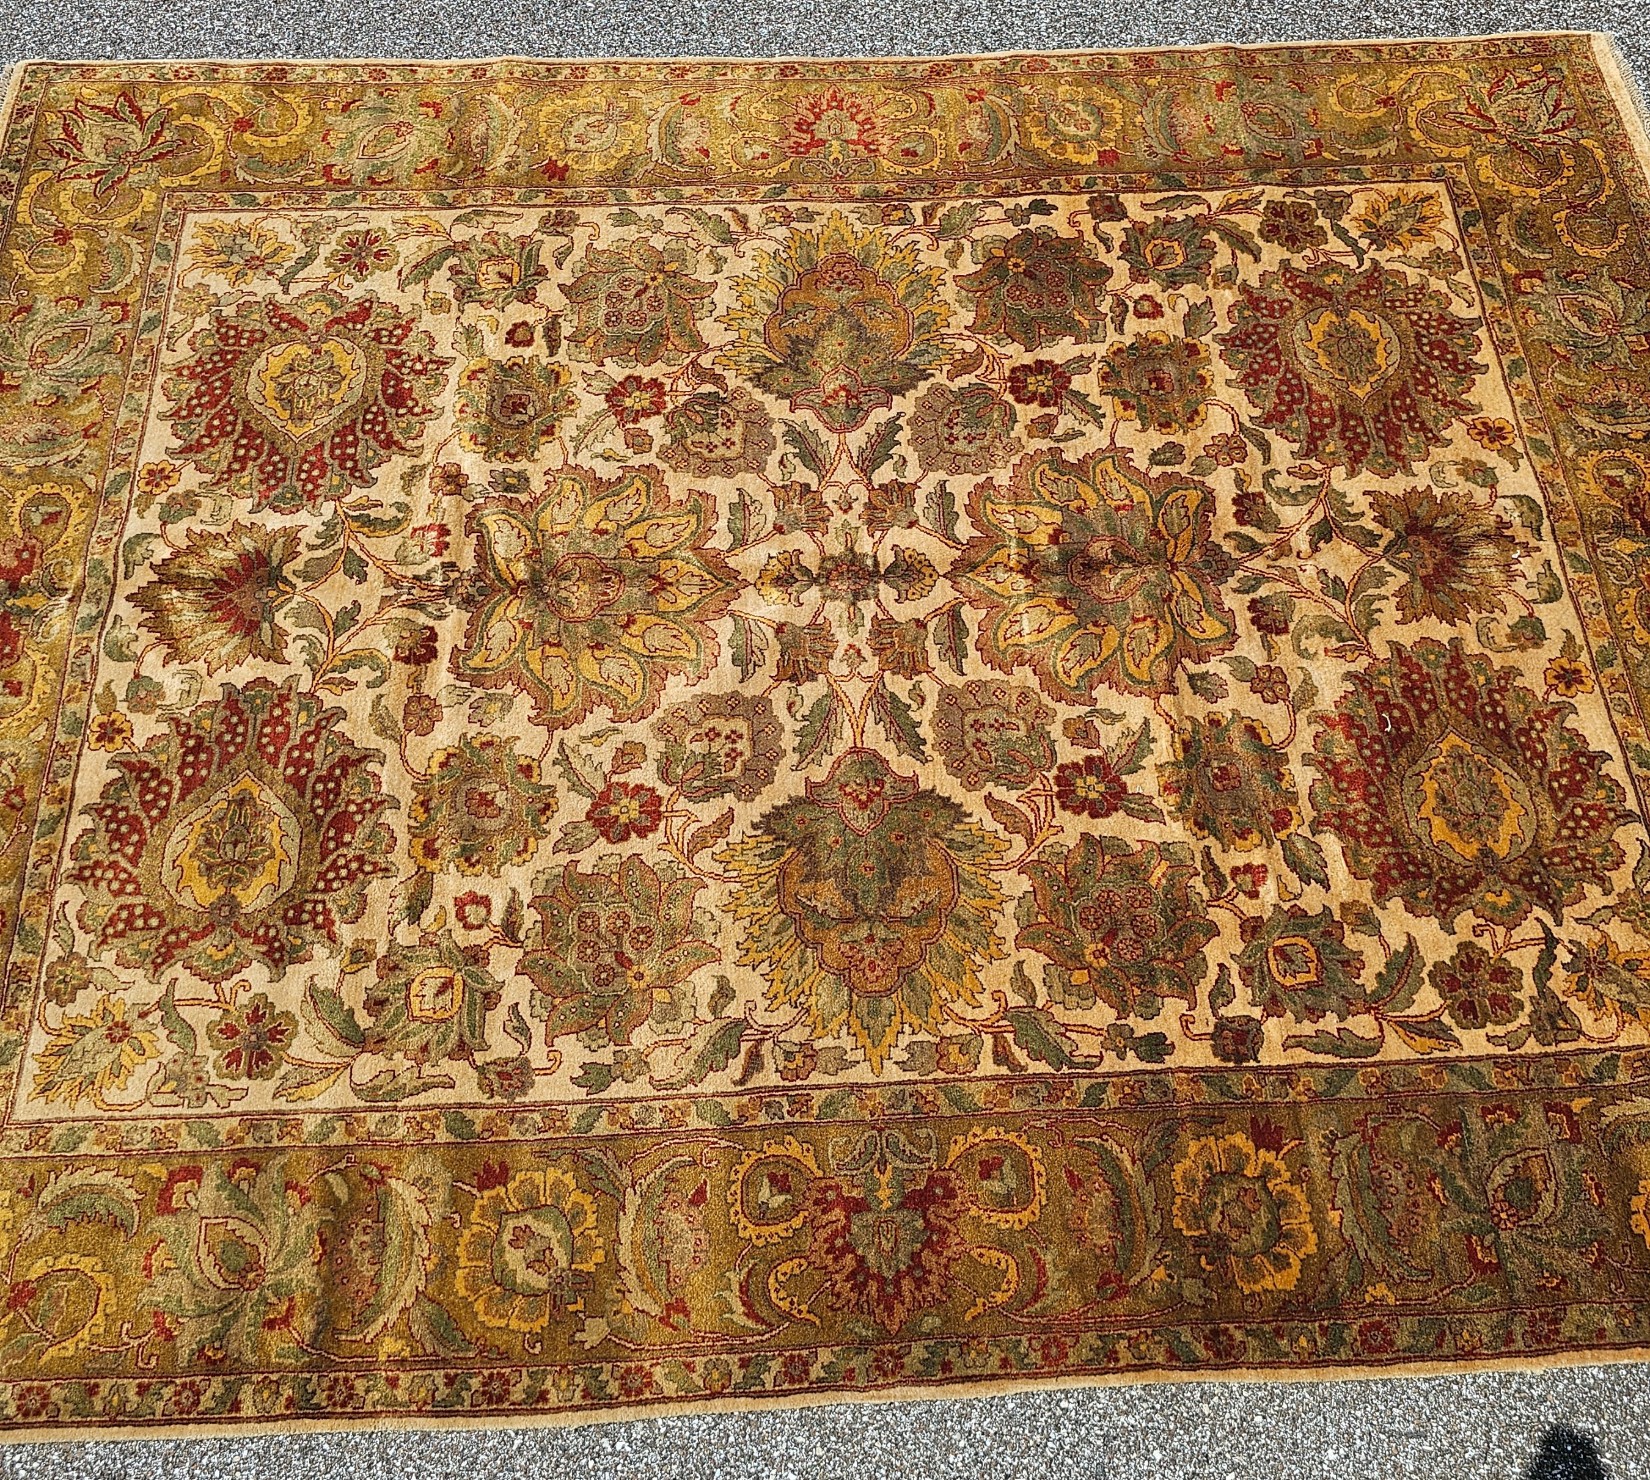 Fine Mahal Hand-Knotted Wool Rug - 9' x 11'10" - Image 4 of 9